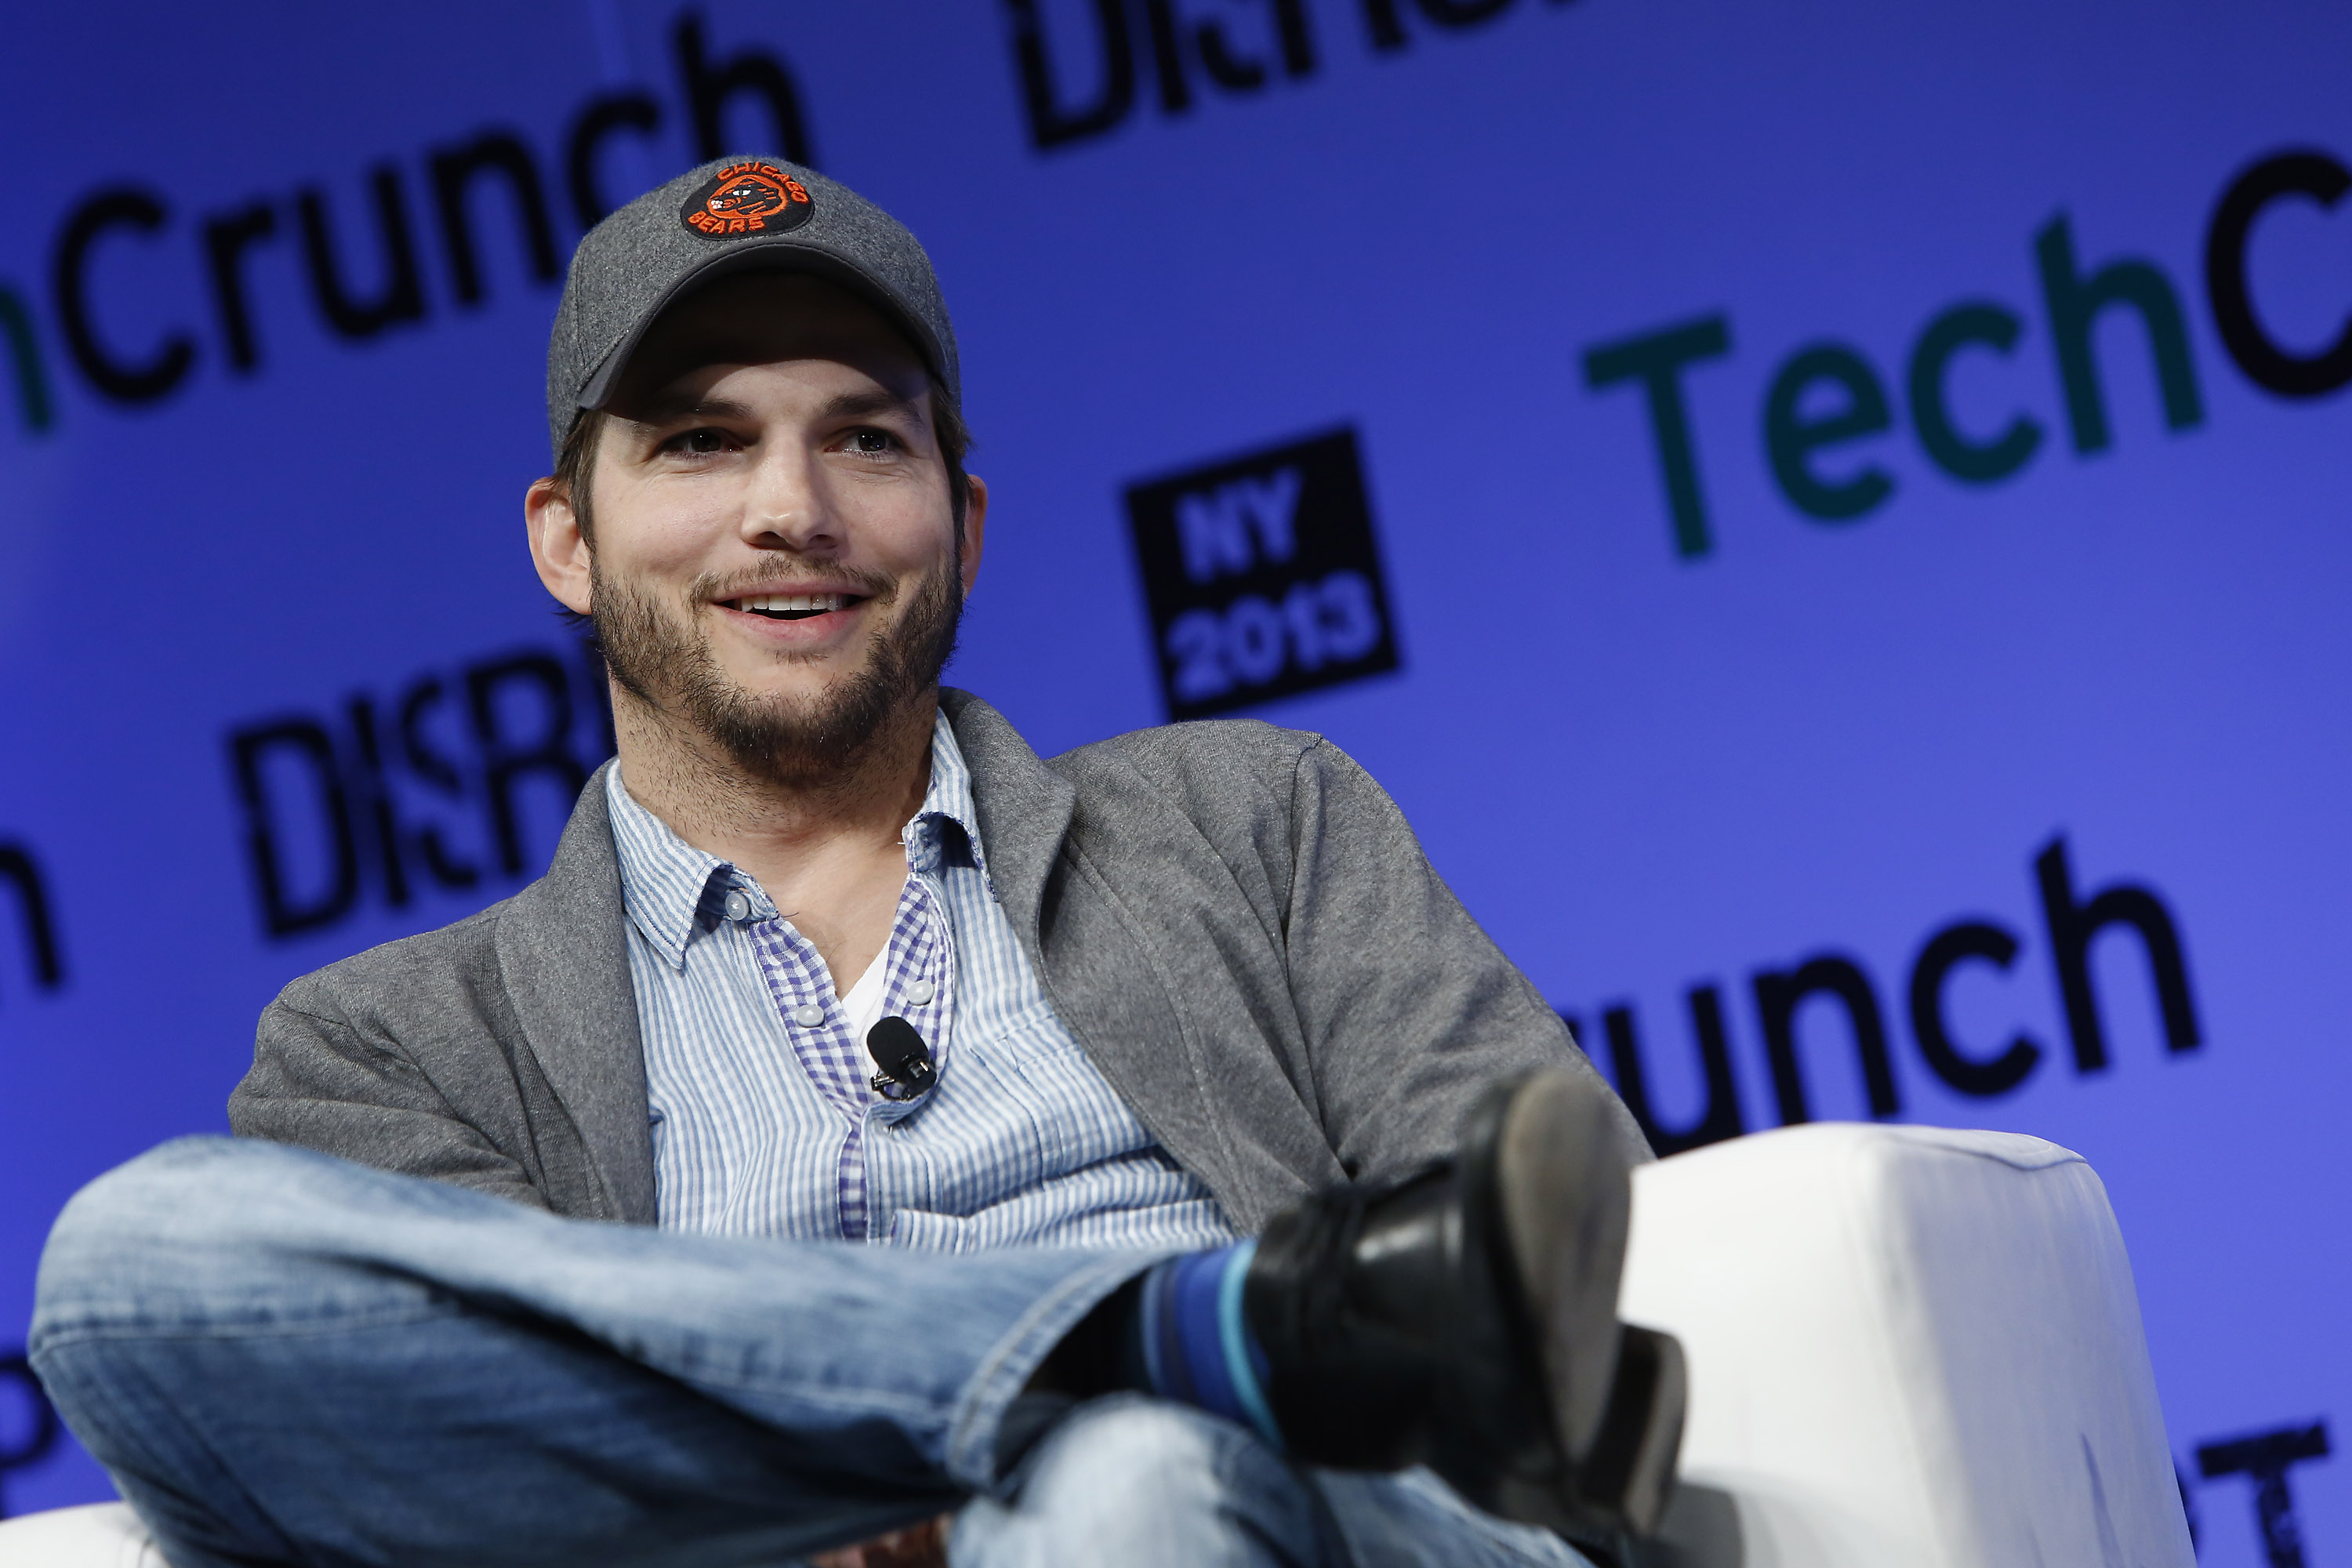 Photo by Brian Ach/Getty Images for TechCrunch